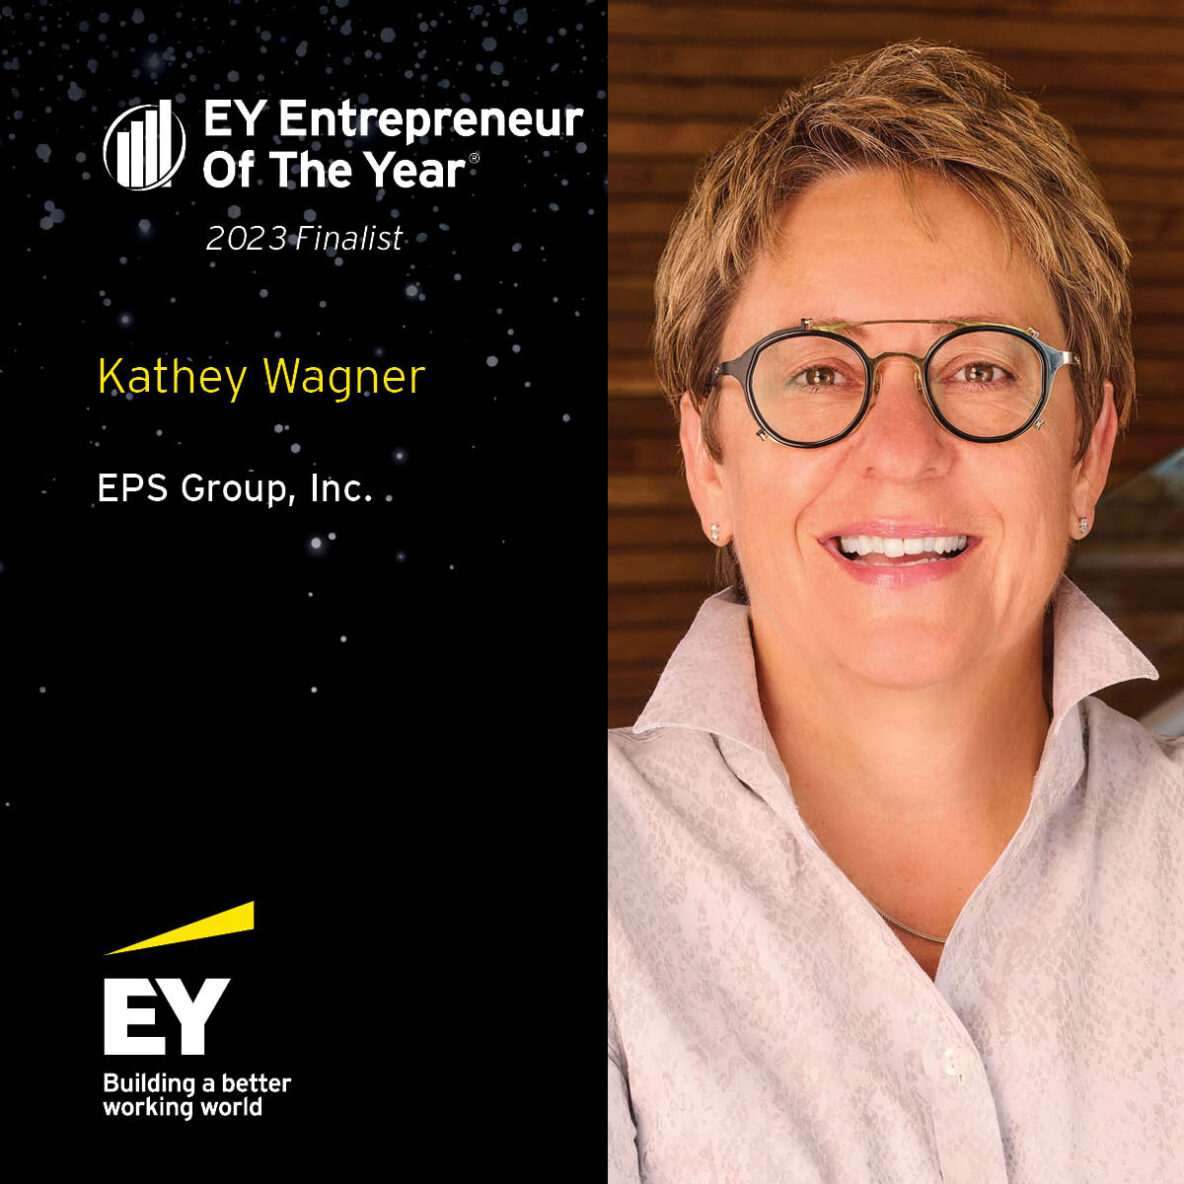 A graphic including the "EY Entrepreneur Of the Year" logo. It states that Kathey Wanger of EPS Group, Inc. was a 2023 Finalist.